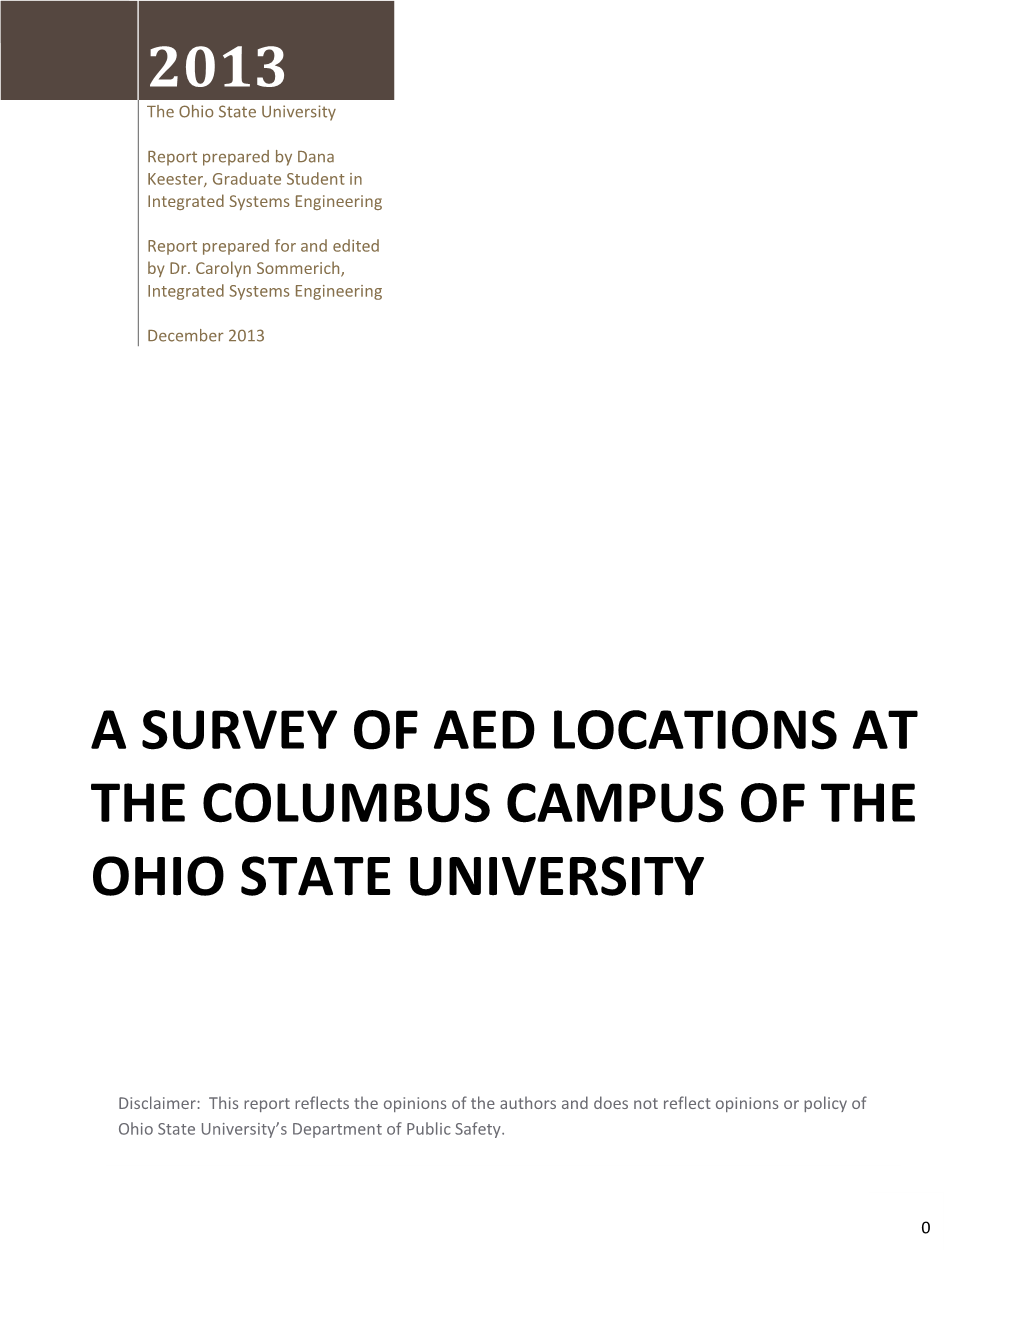 A Survey of Aed Locations at the Columbus Campus of the Ohio State University